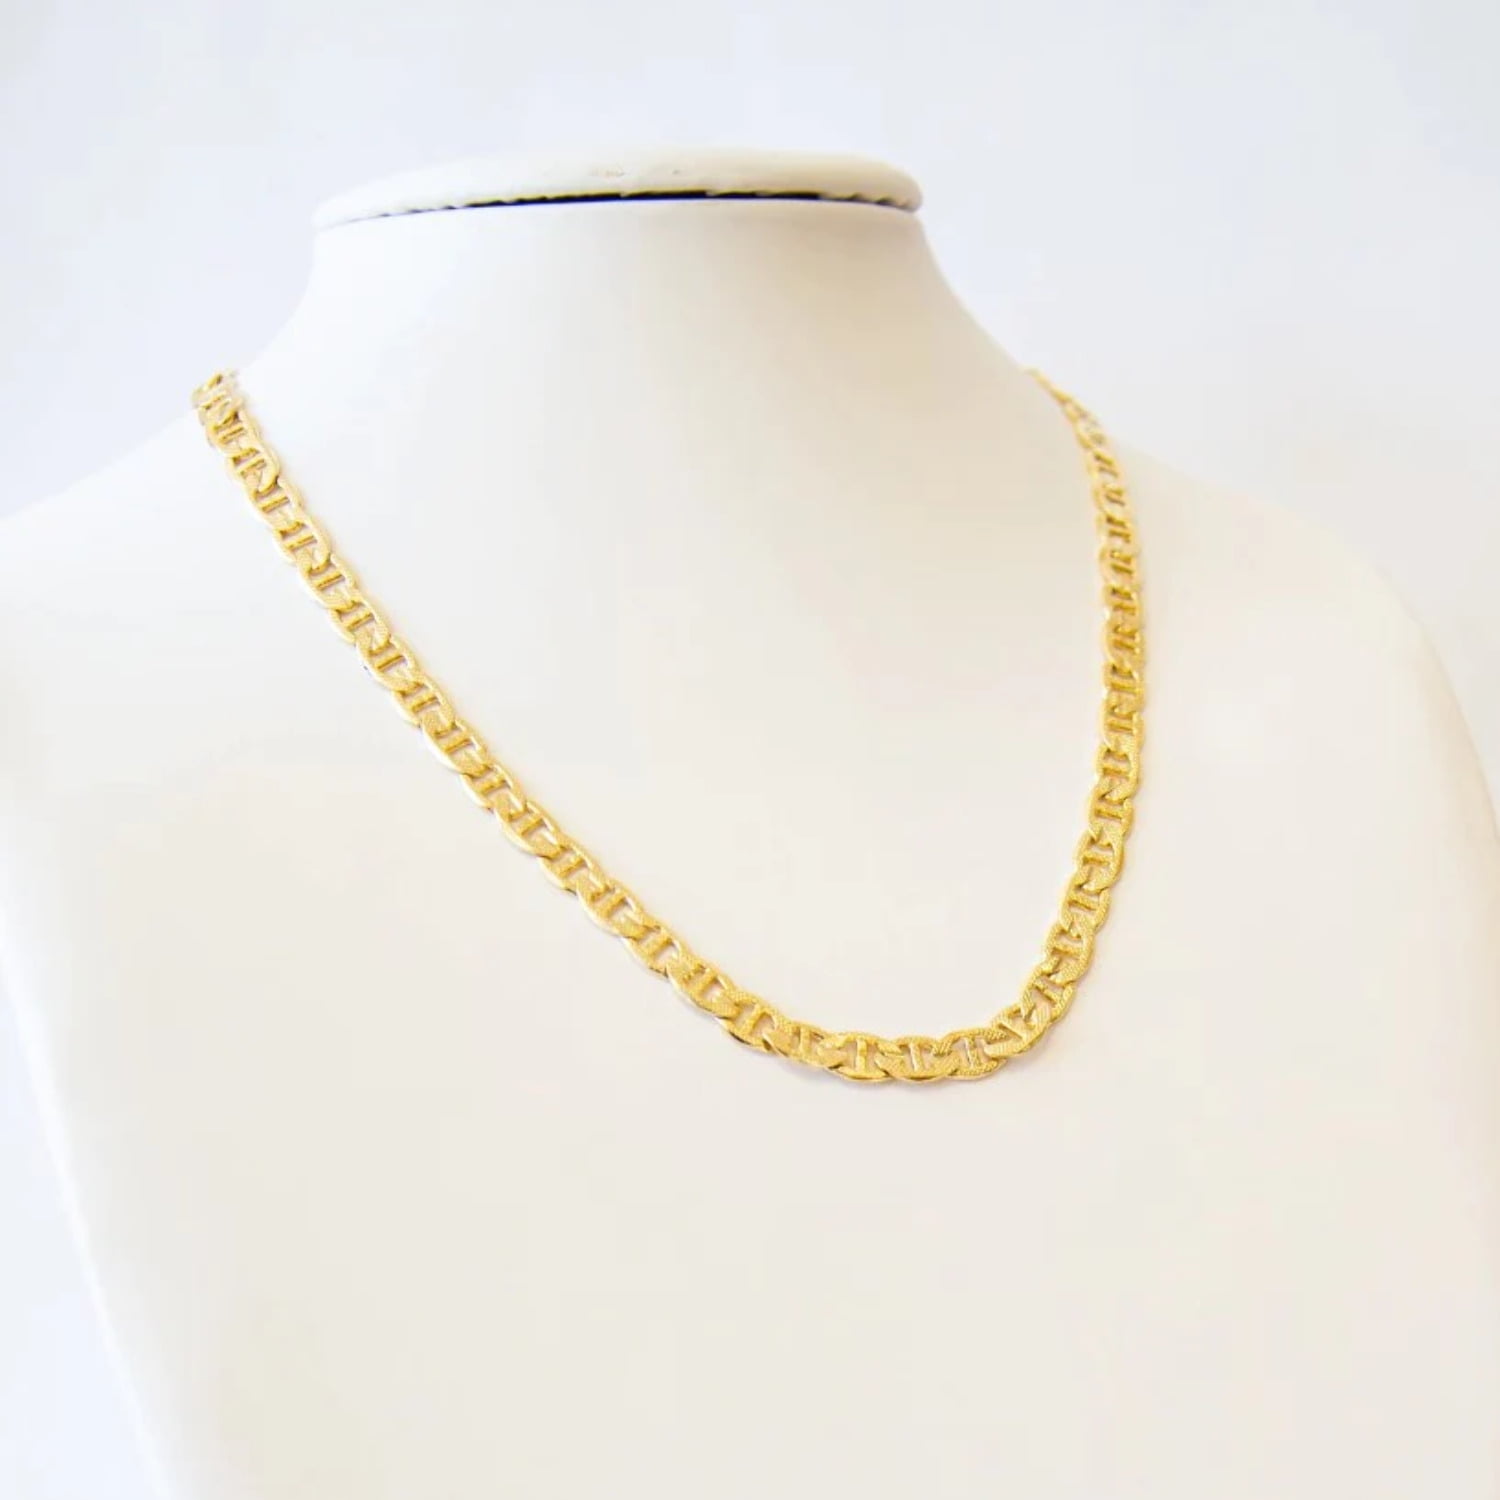 Box Chain, Delicate Gold Chain, Gold Plated Chain, Dainty Chain, Gold  Plated, Necklace Chain, Bracelet Chain, Gold Chain, 1.80mm Box Chain